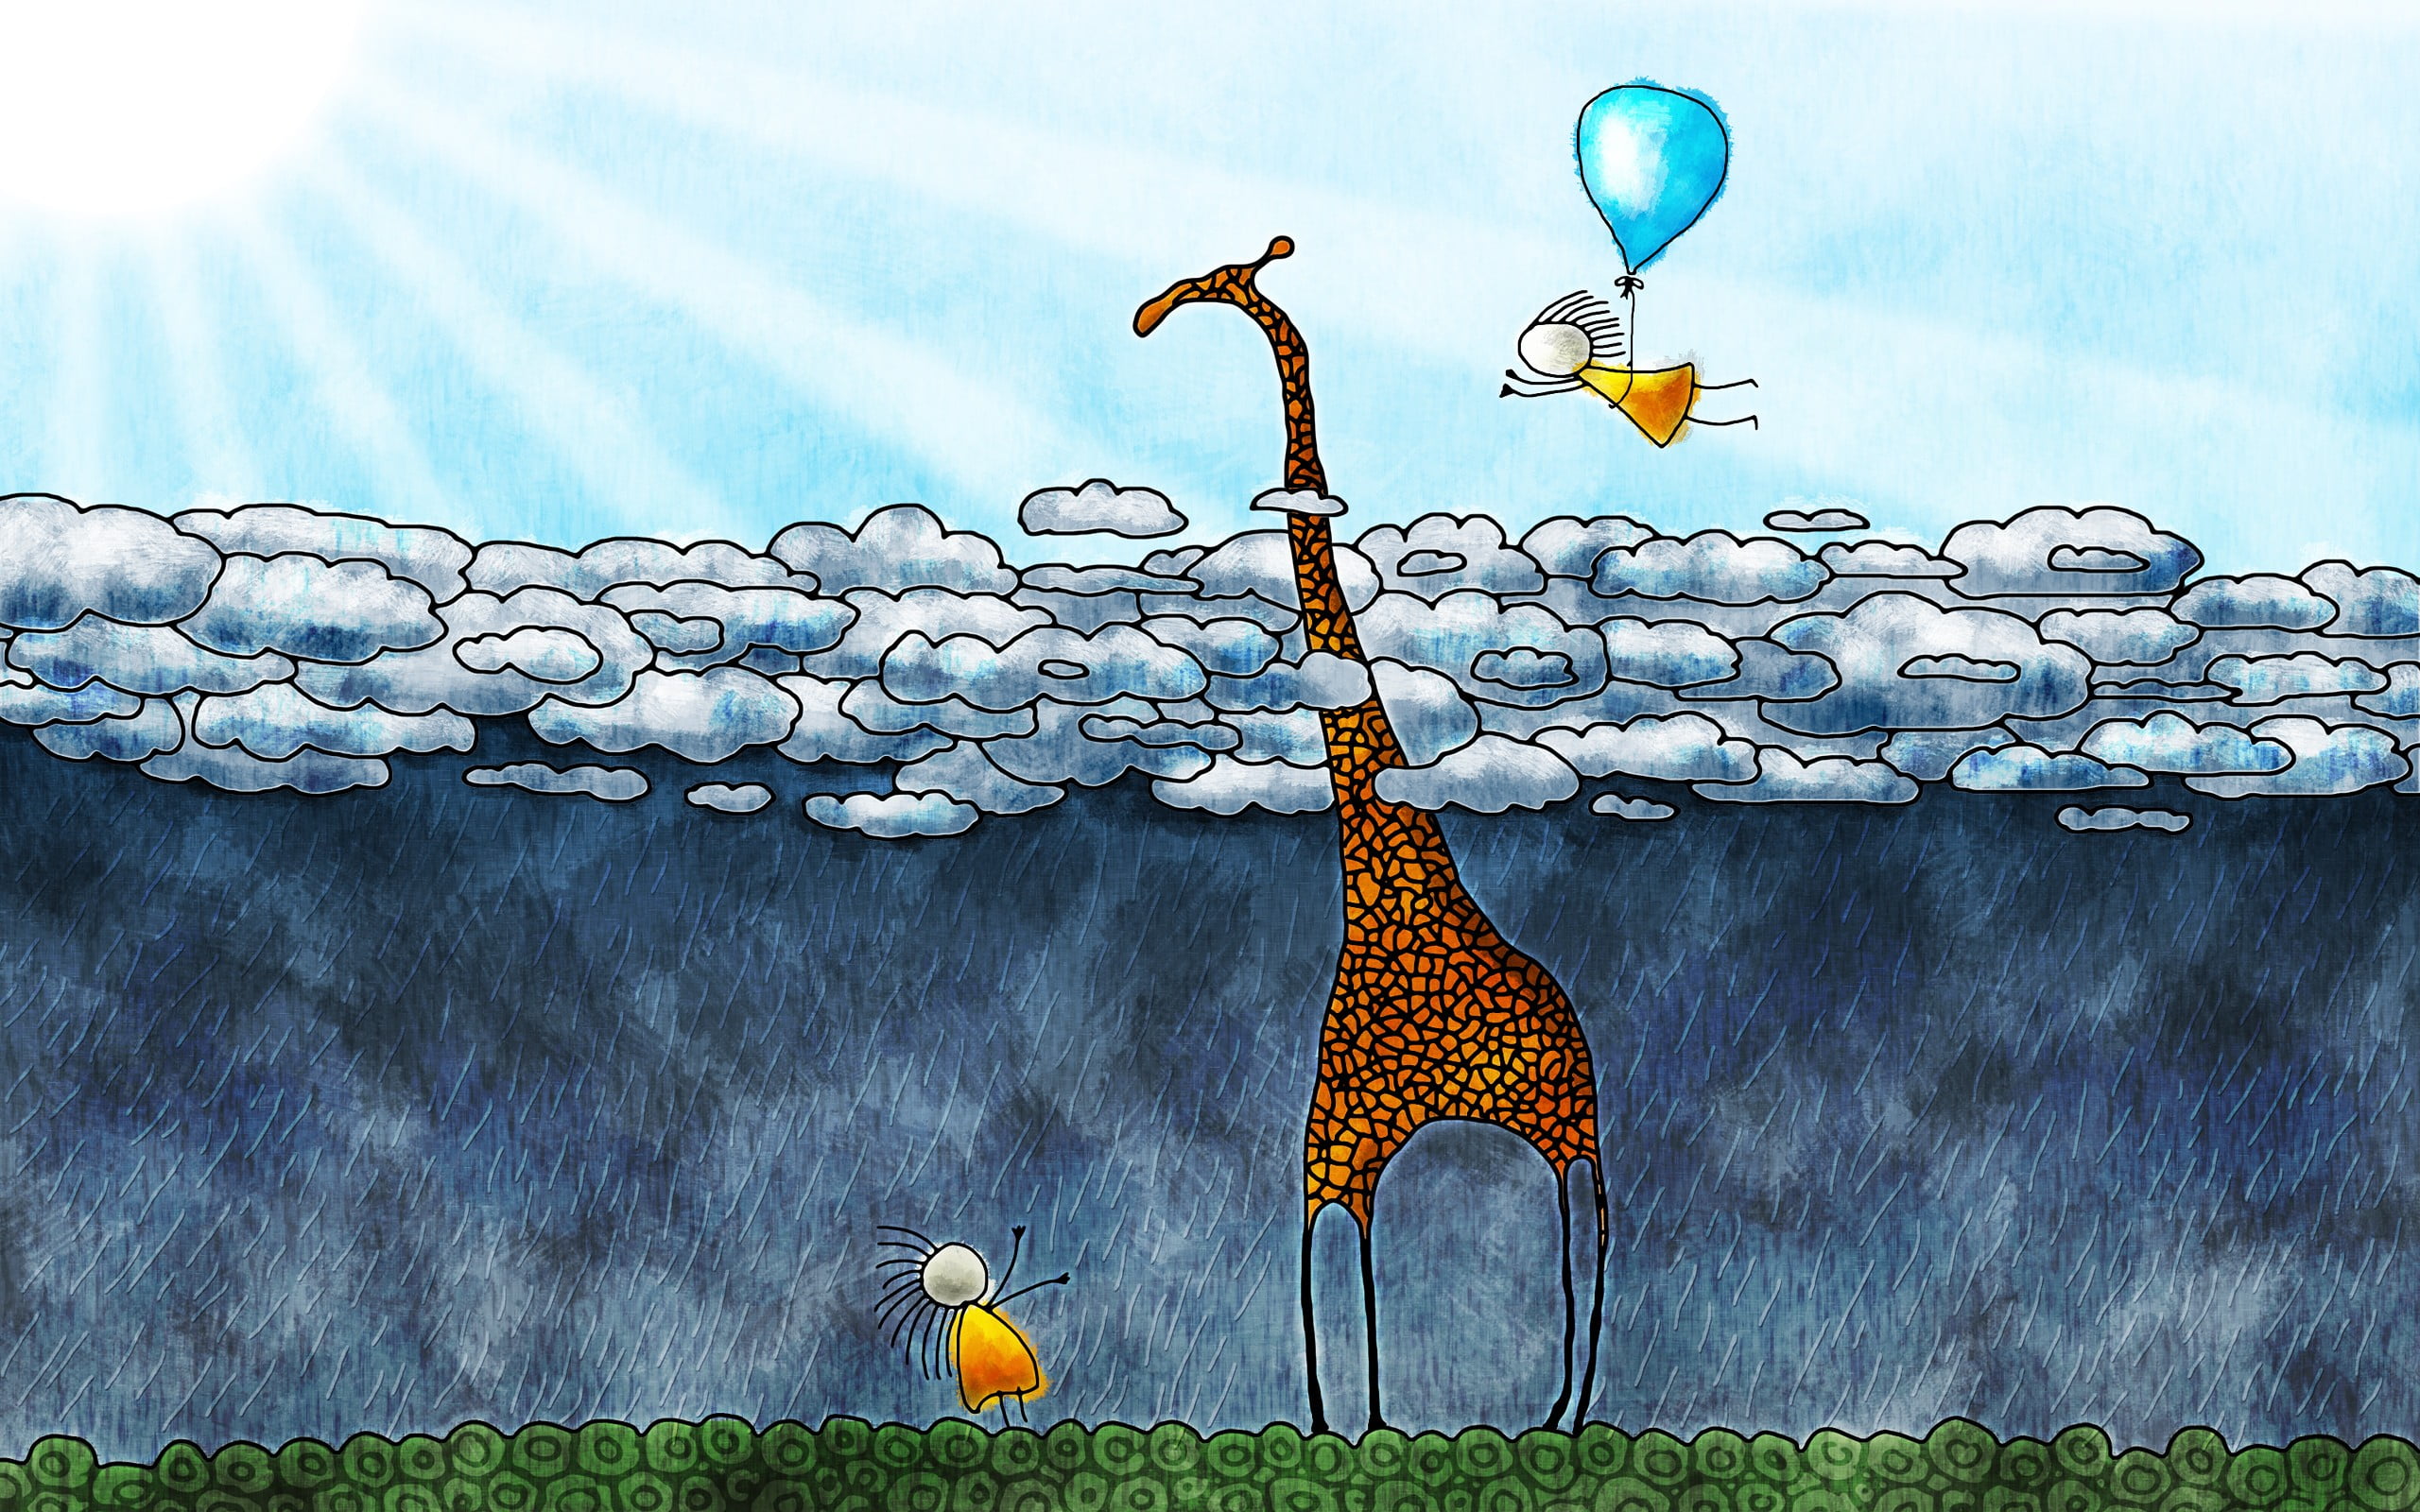 giraffe two boy and clouds painting, artwork, anime, clouds, balloon